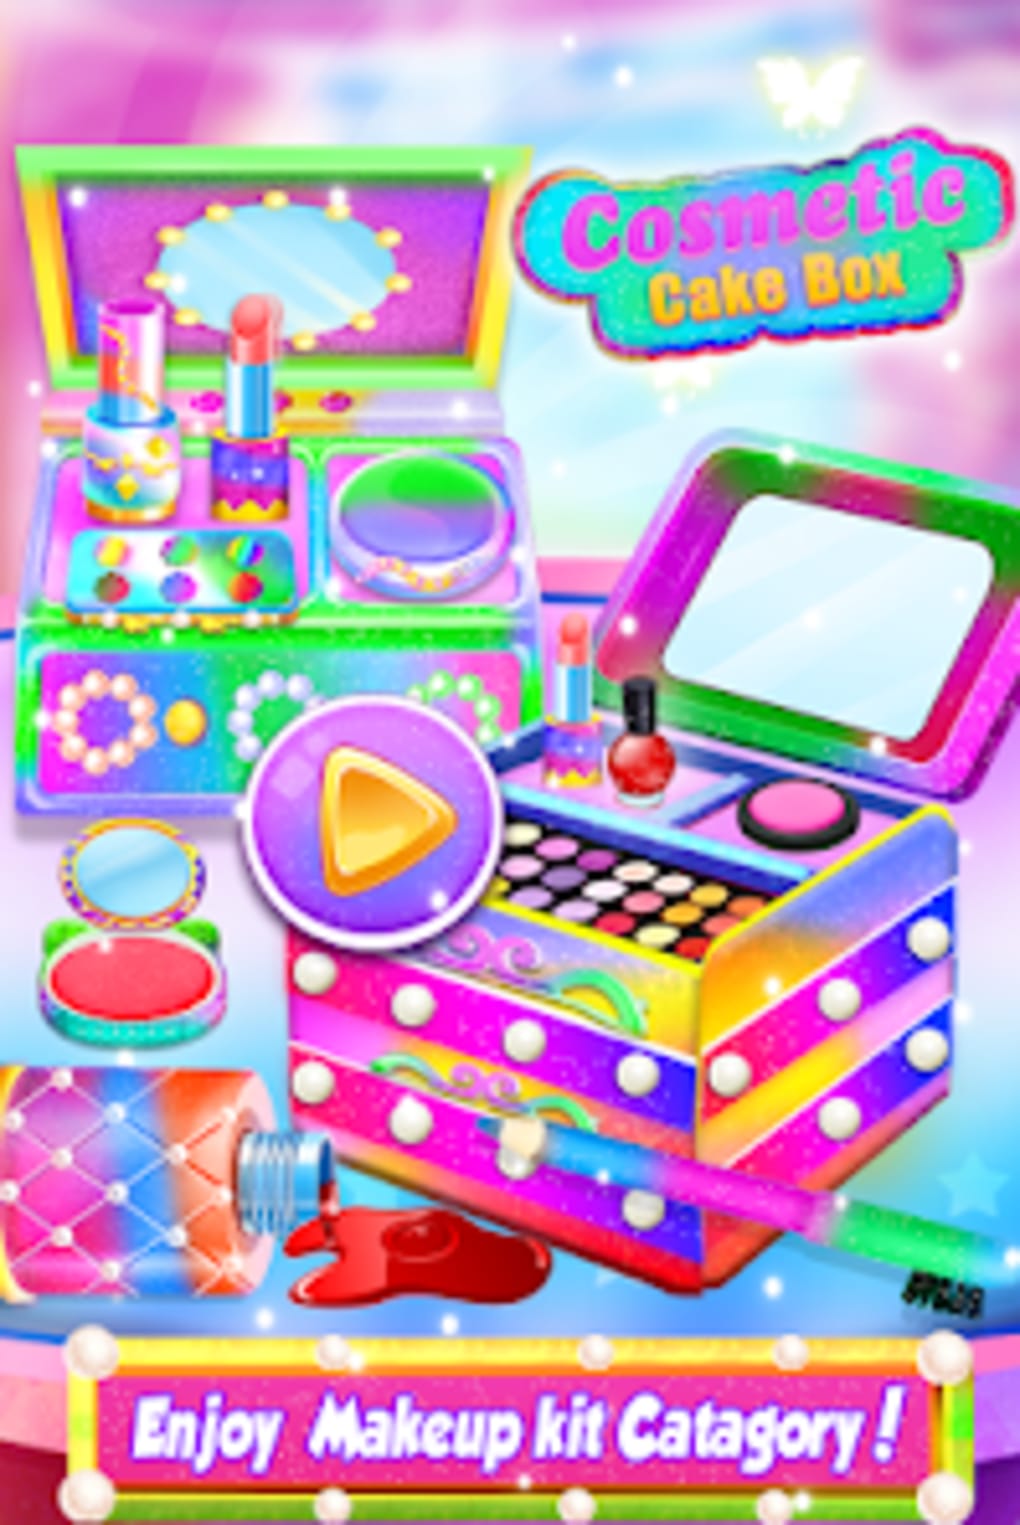 Ice Cream Chocolate Yummy Doll Cake Maker 2020 - APK Download for Android |  Aptoide